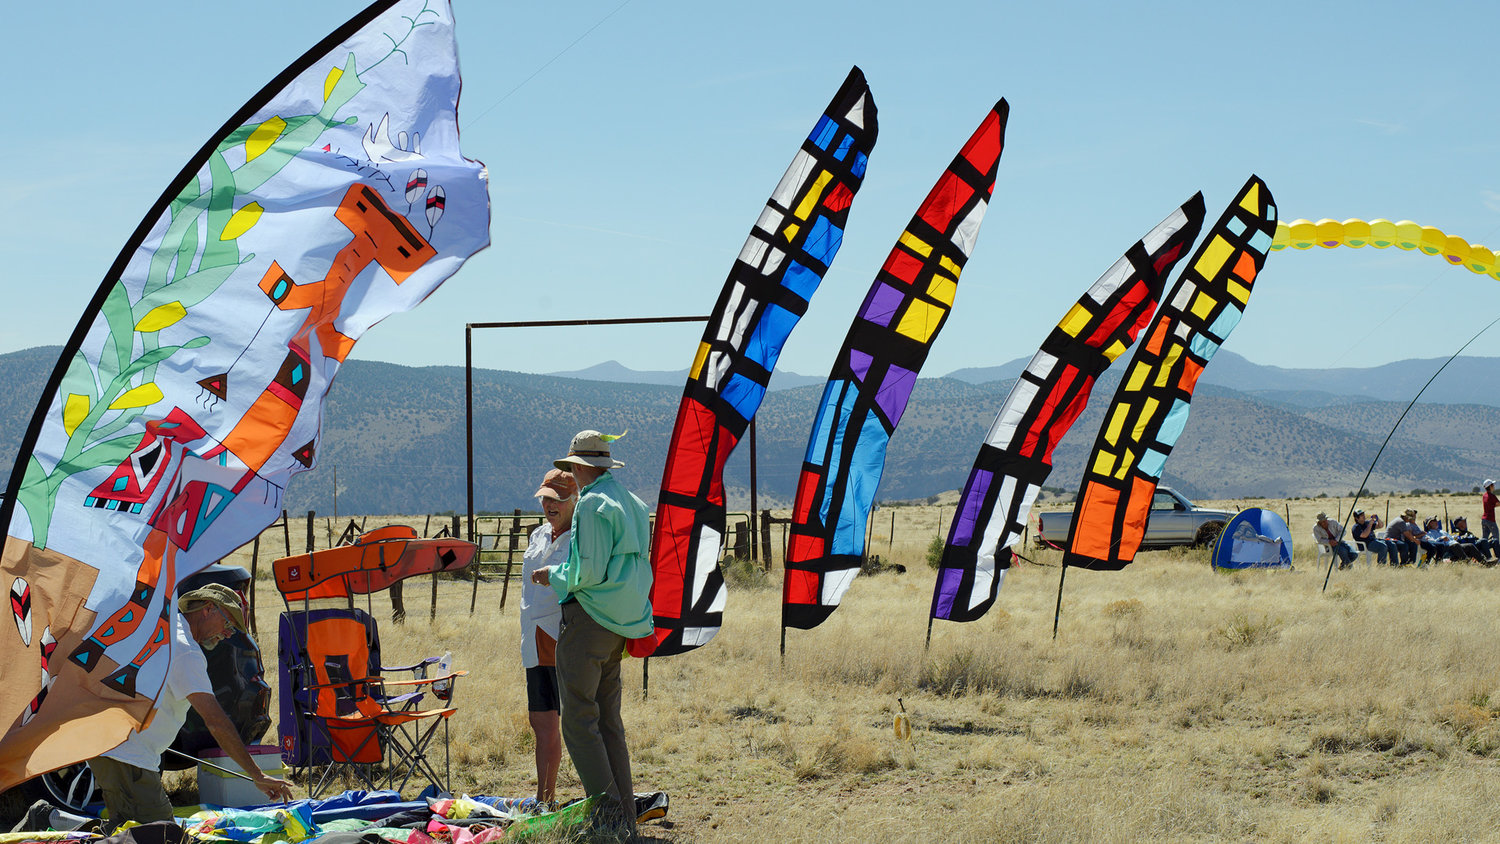 Deb Lenzen’s colorful banners added to the festive atmosphere of the 2018 Kite Flying Picnic.